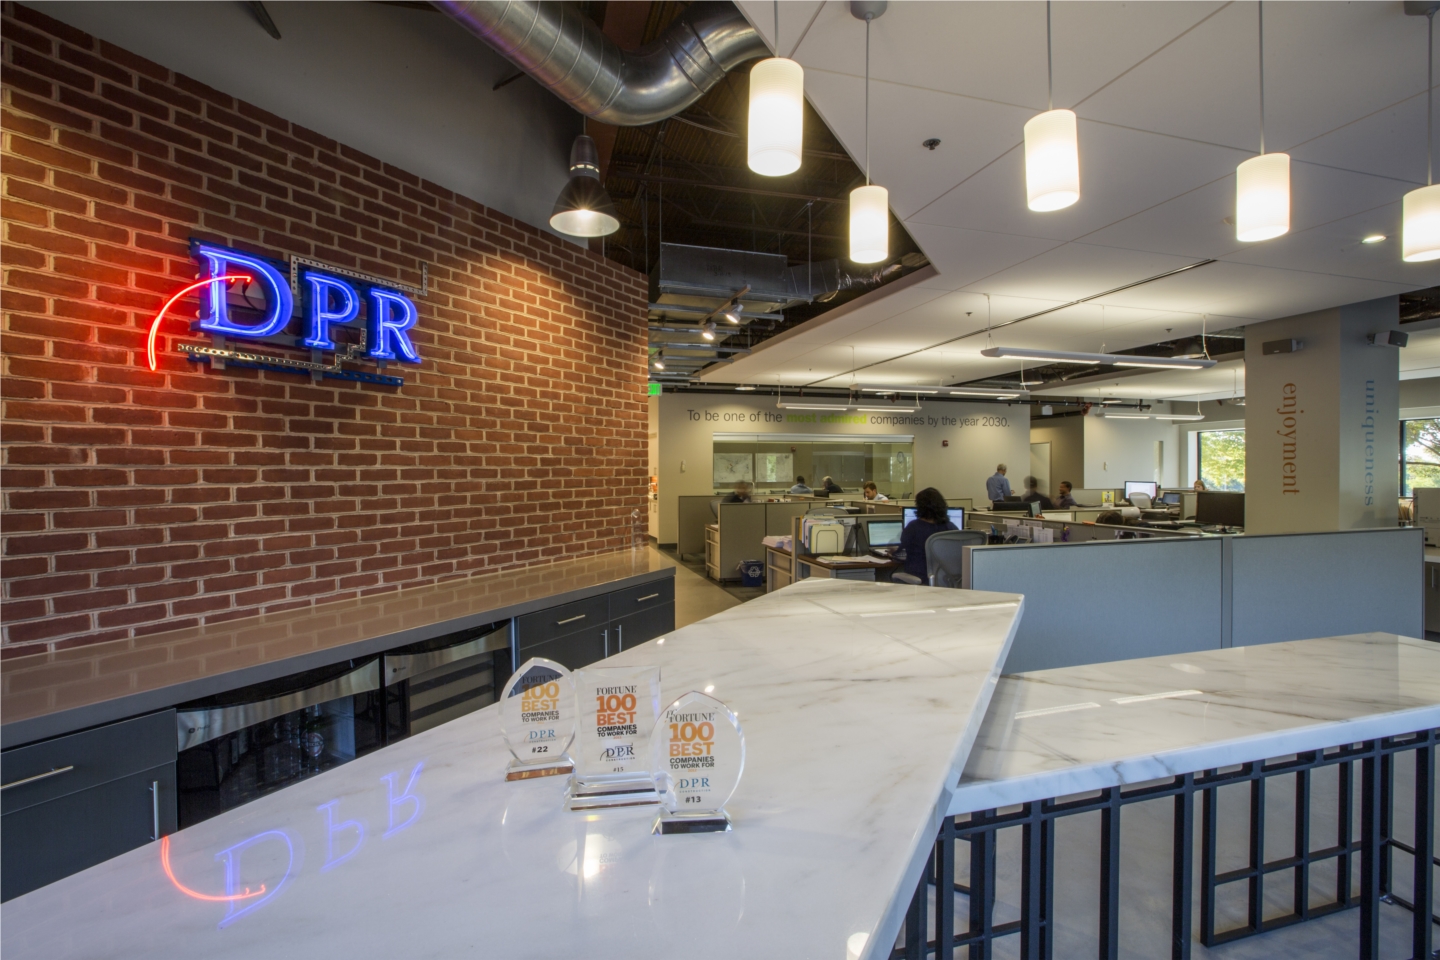 The DPR Baltimore Office is located in Columbia, Maryland.  